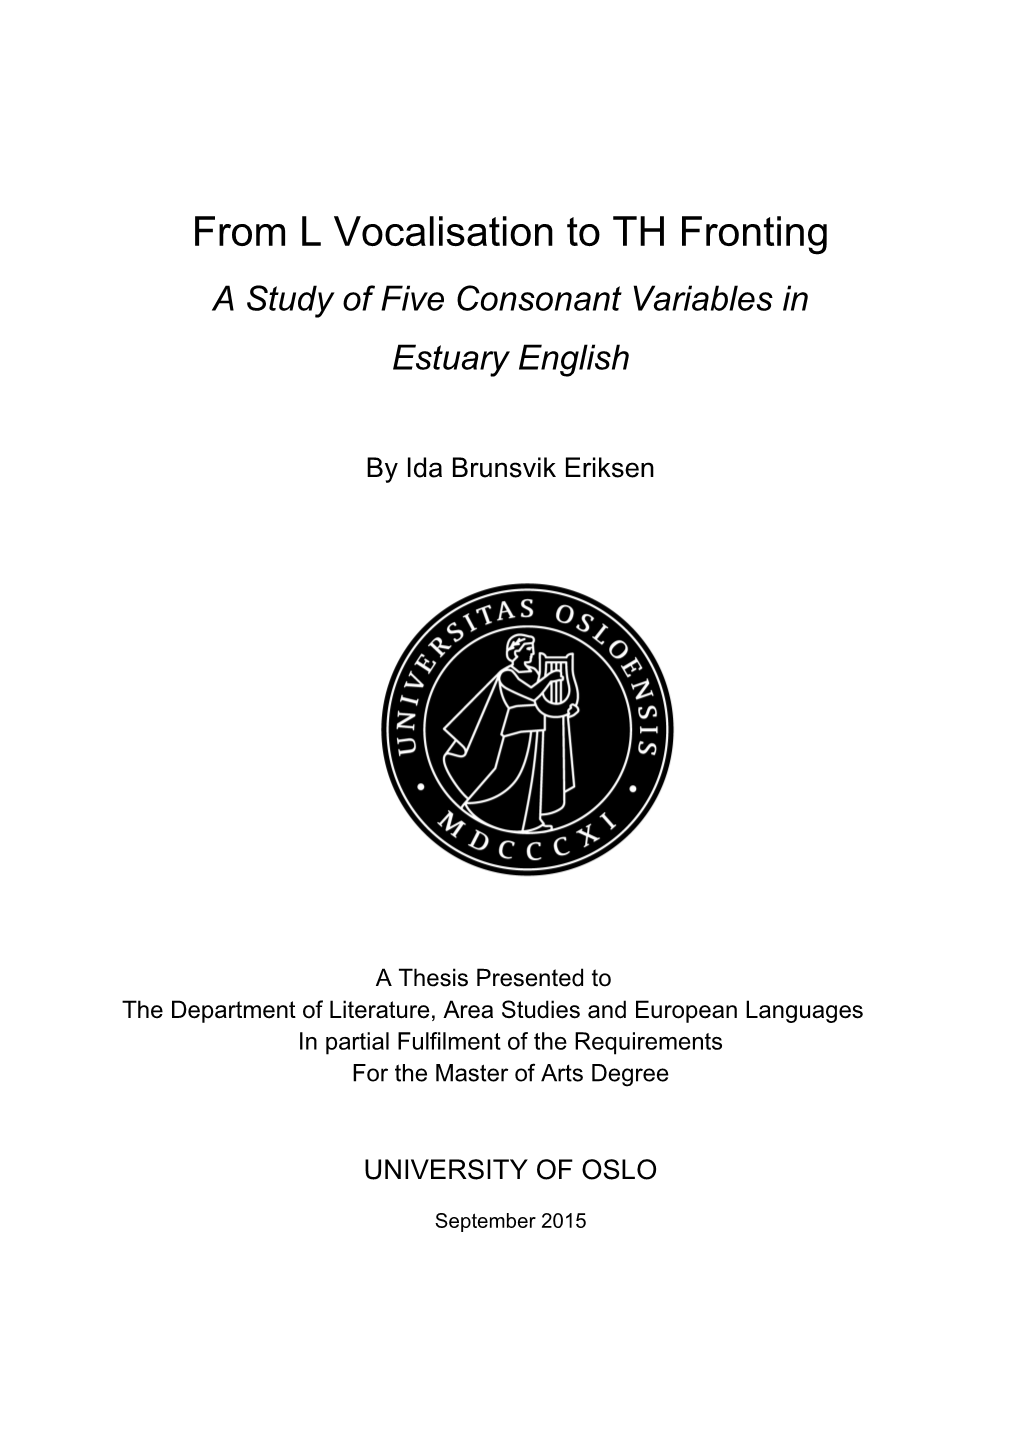 From L Vocalisation to TH Fronting a Study of Five Consonant Variables in Estuary English